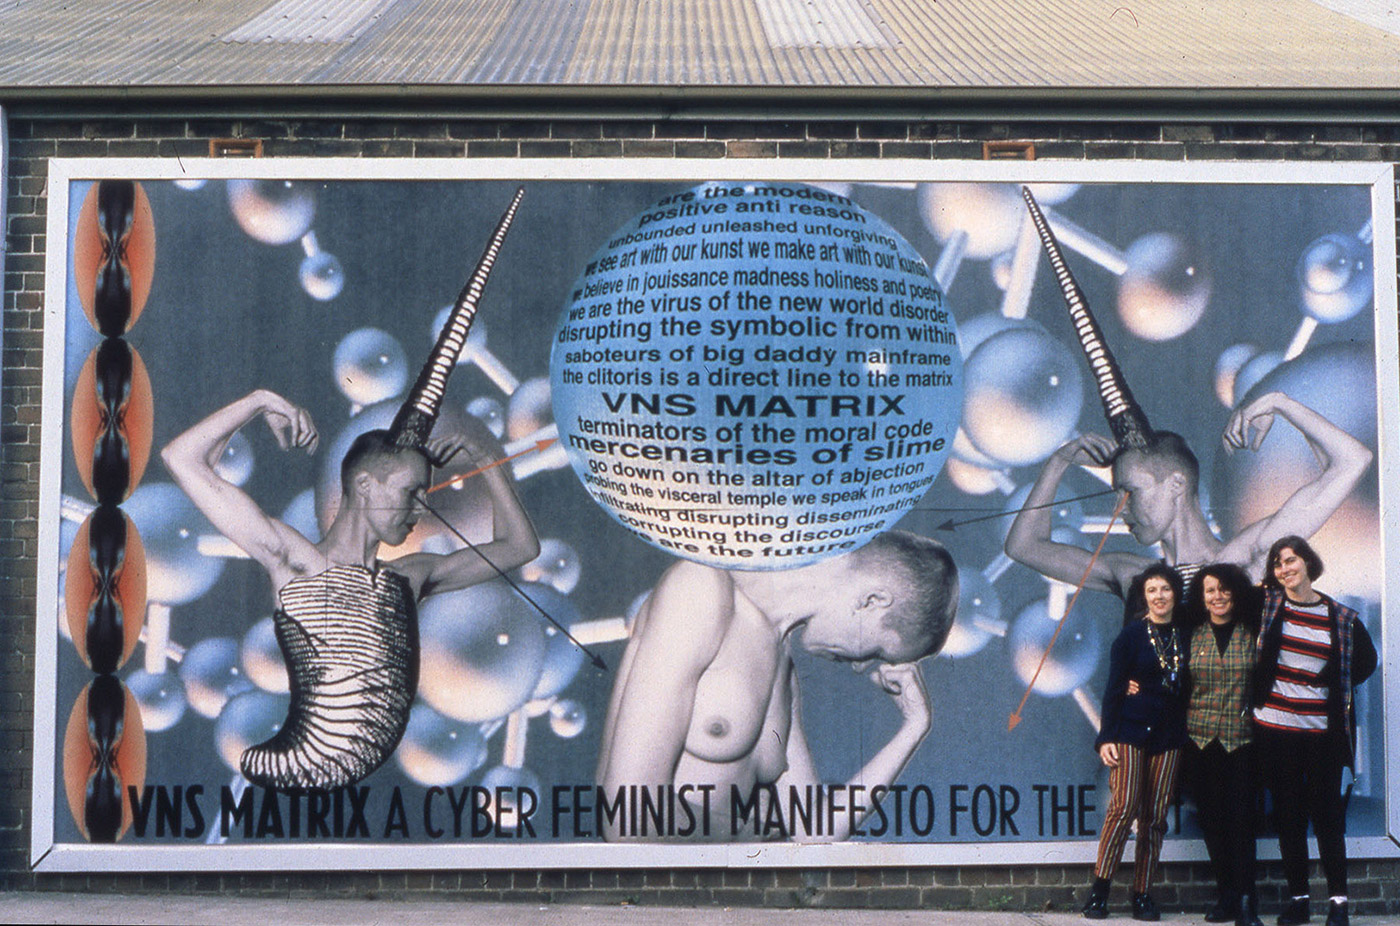 A billboard based on the manifesto shown on the side of Tin Sheds Gallery, Sydney, in 1992. Photo: VNS Matrix.